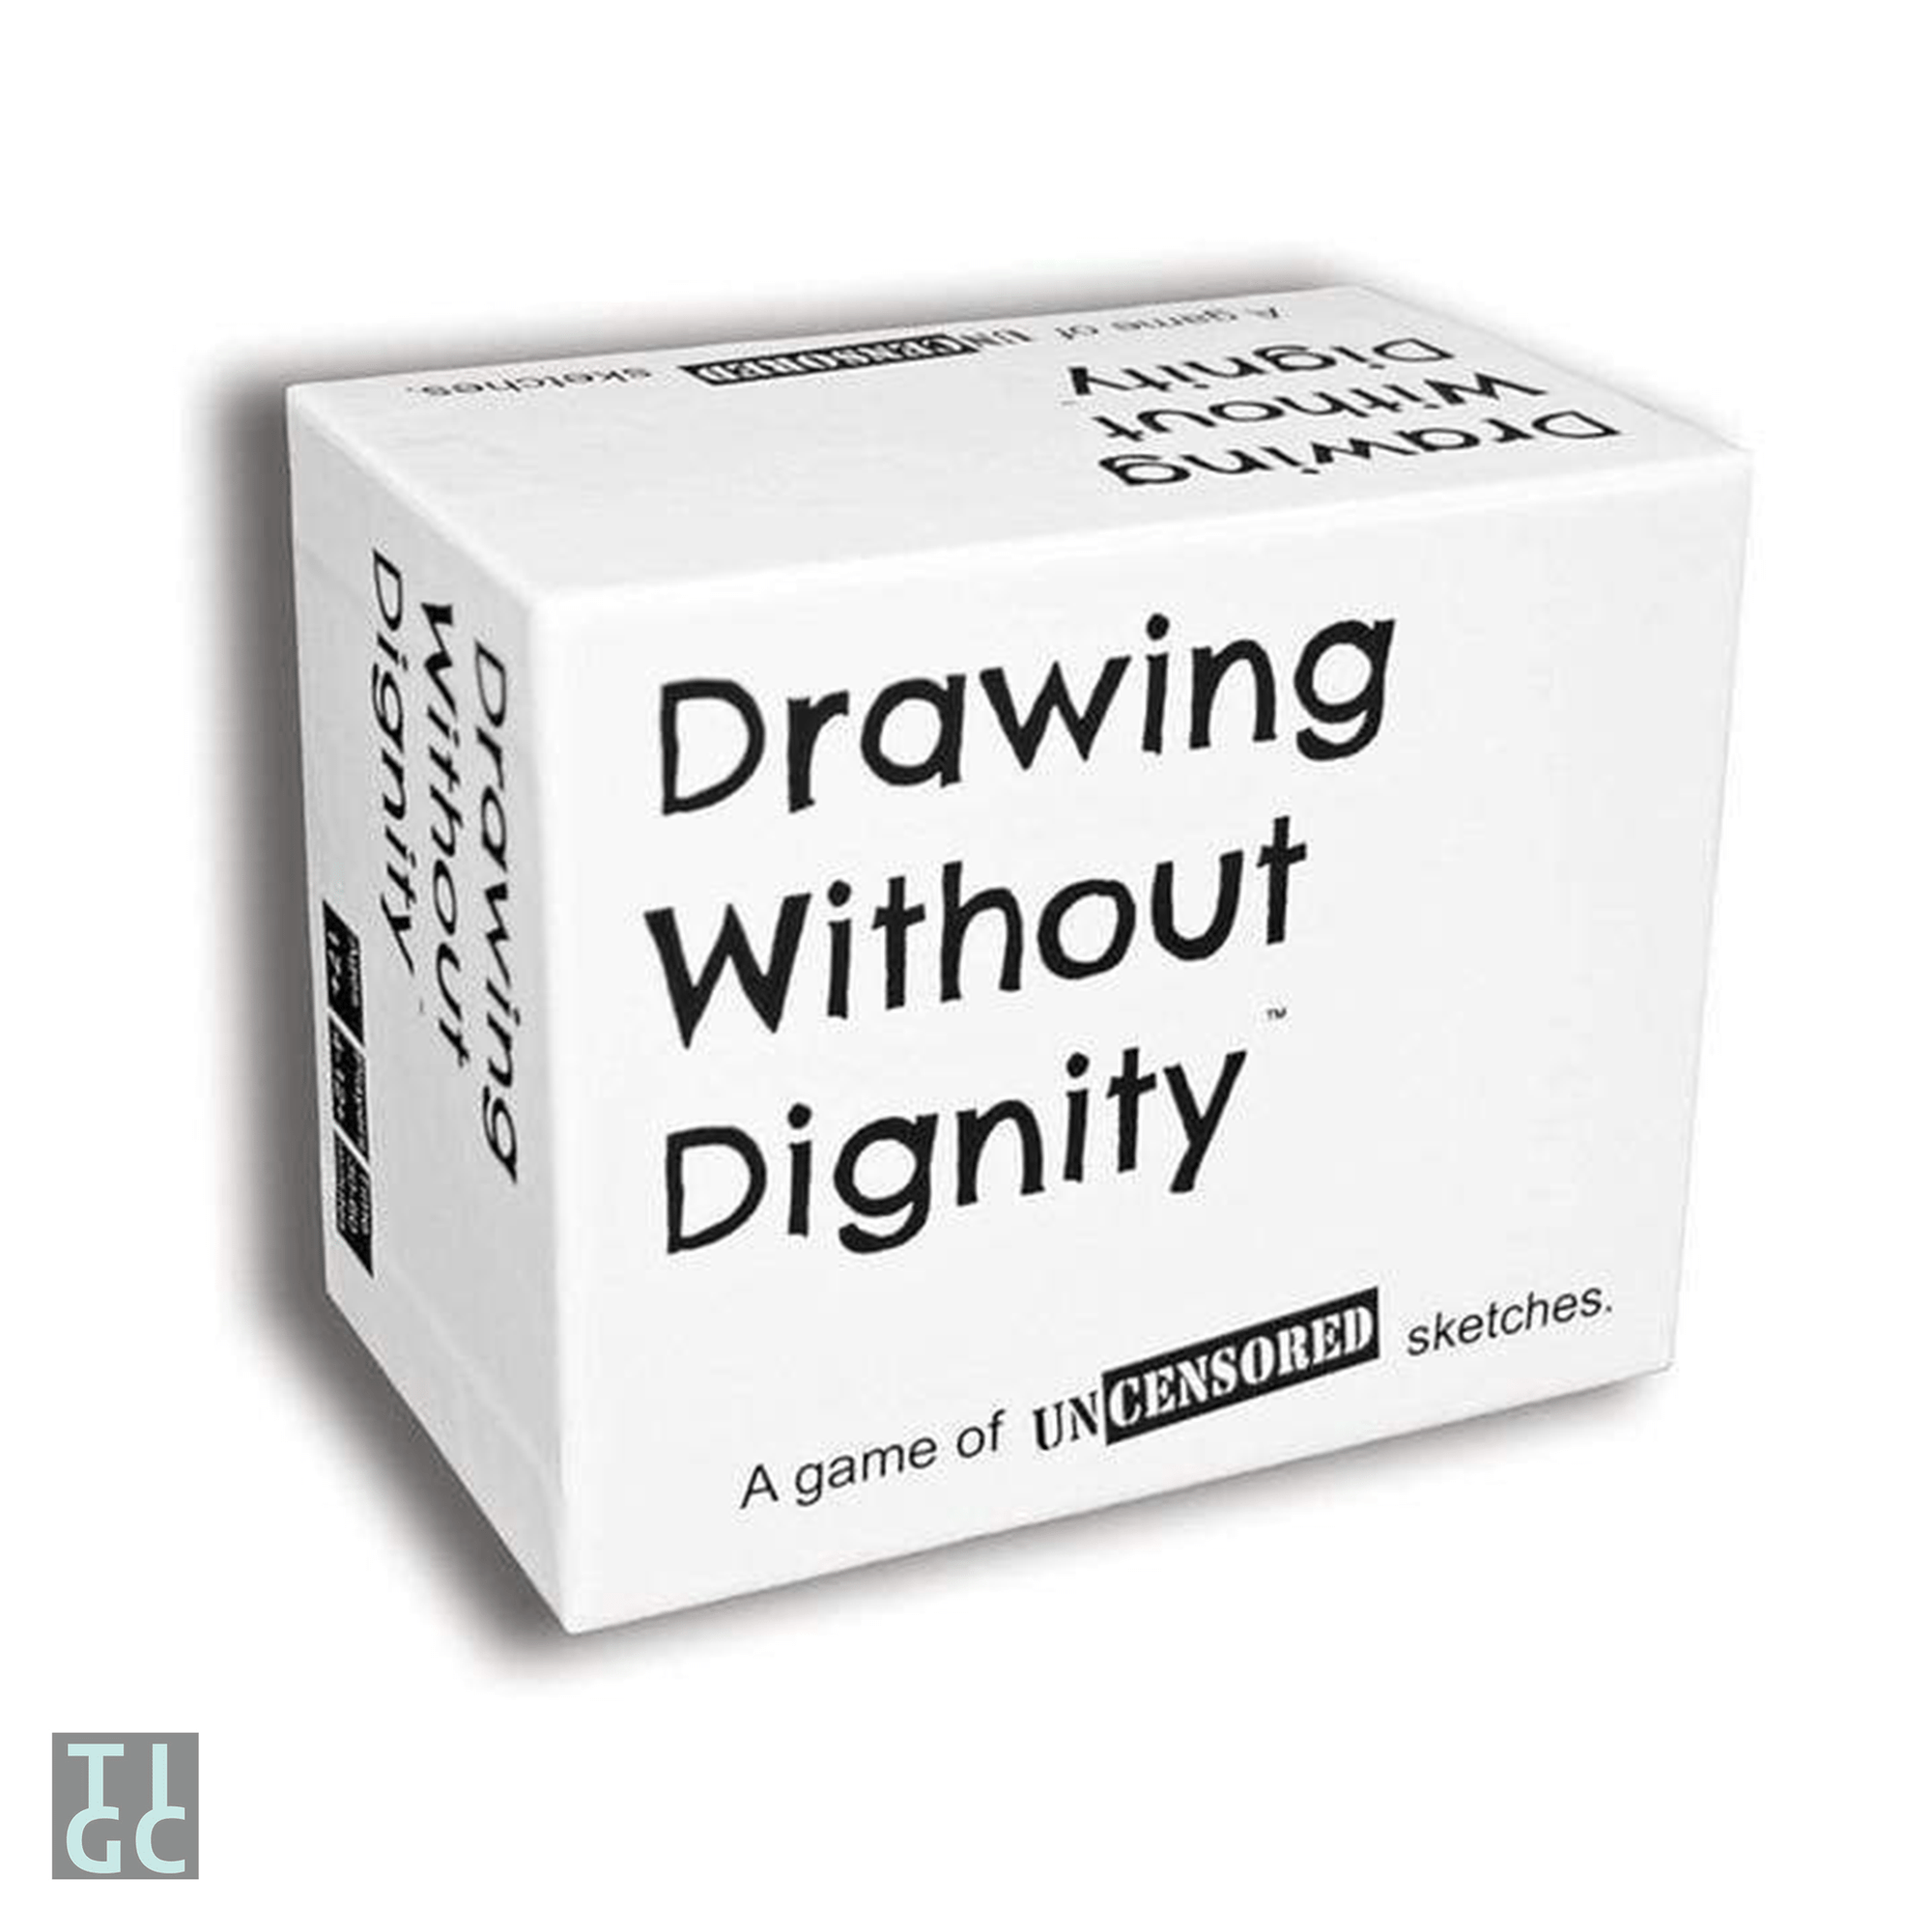 TIGC The Inappropriate Gift Co Drawing Without Dignity - A Game of Uncensored Sketches